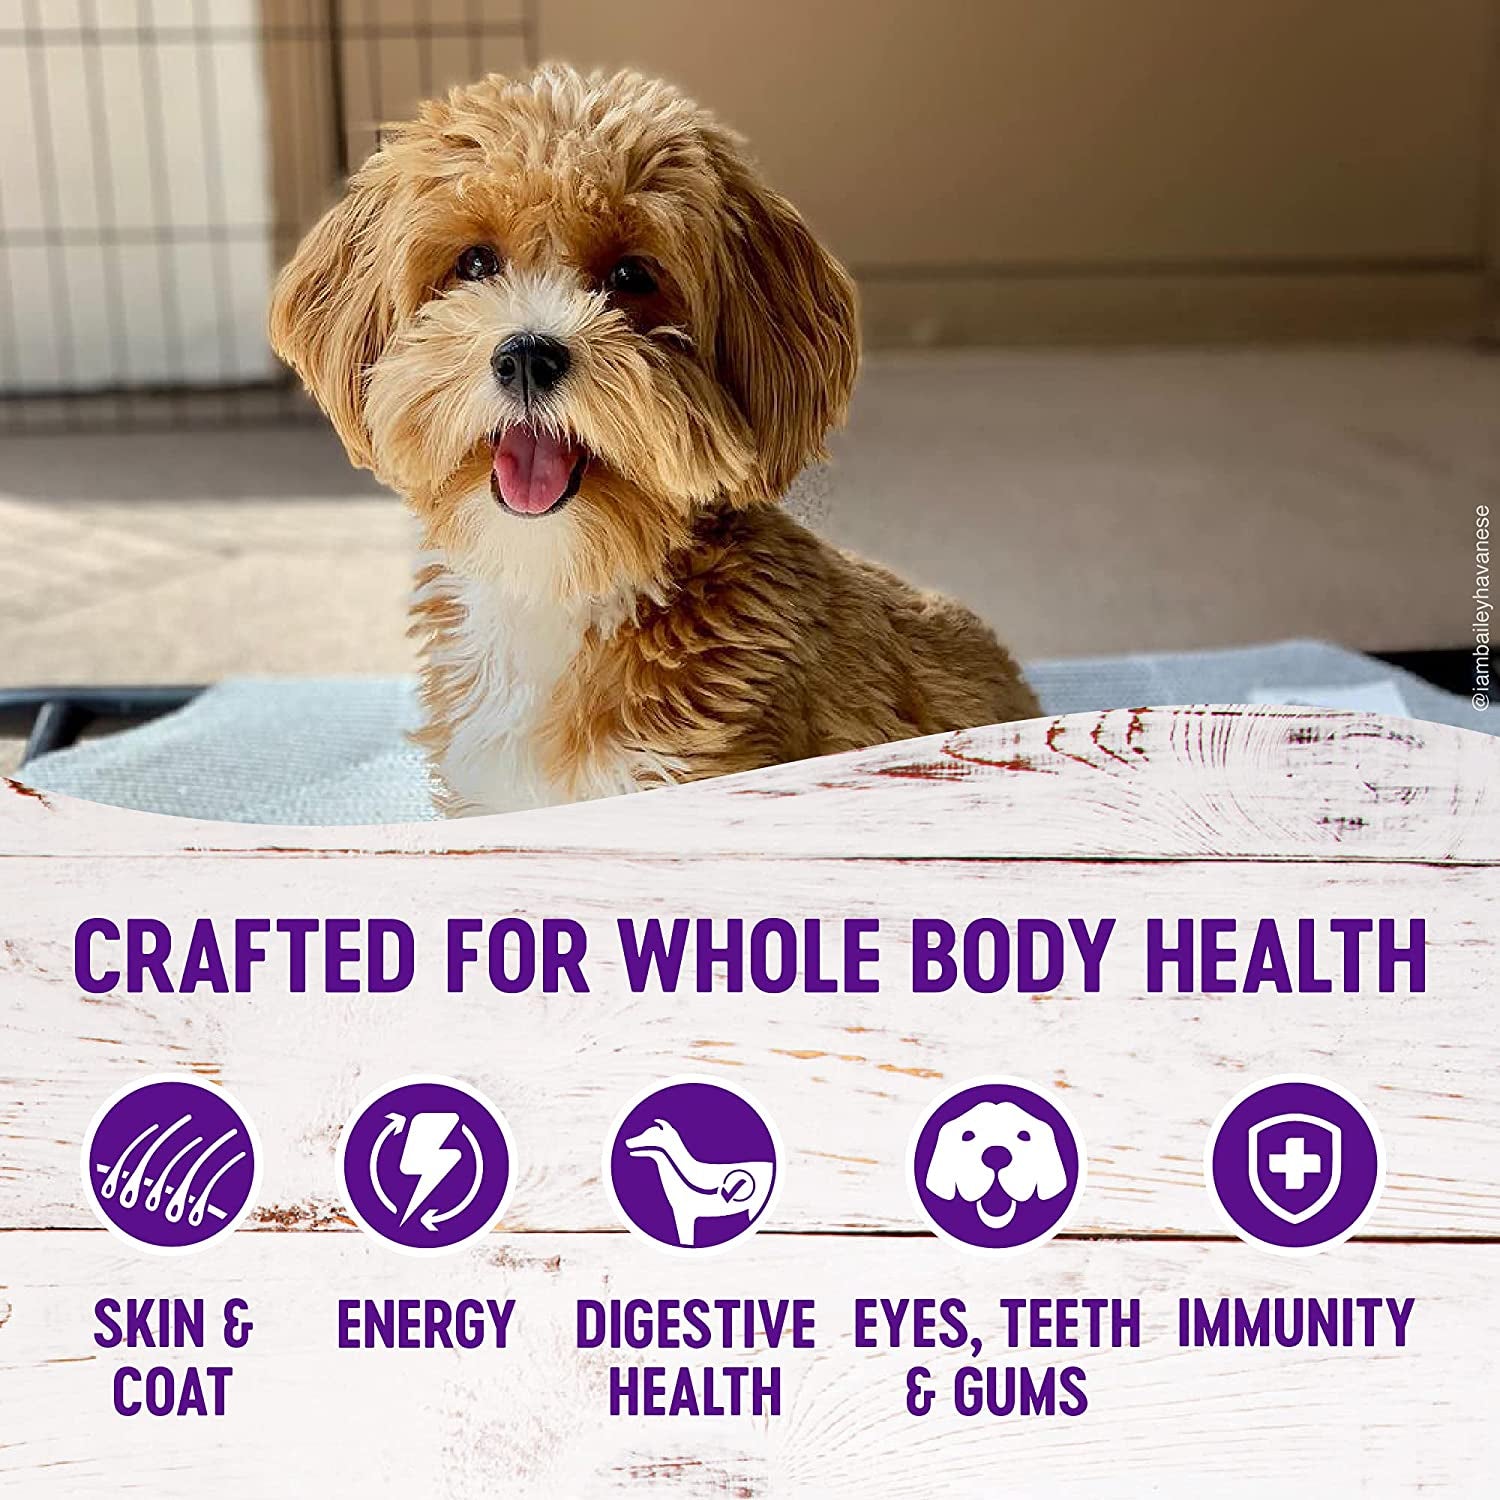 Wellness Complete Health Small Breed Dry Dog Food with Grains, Natural Ingredients, Made in USA with Real Turkey, for Dogs up to 25 Lbs, (Adult, Turkey & Oatmeal, 4-Pound Bag)